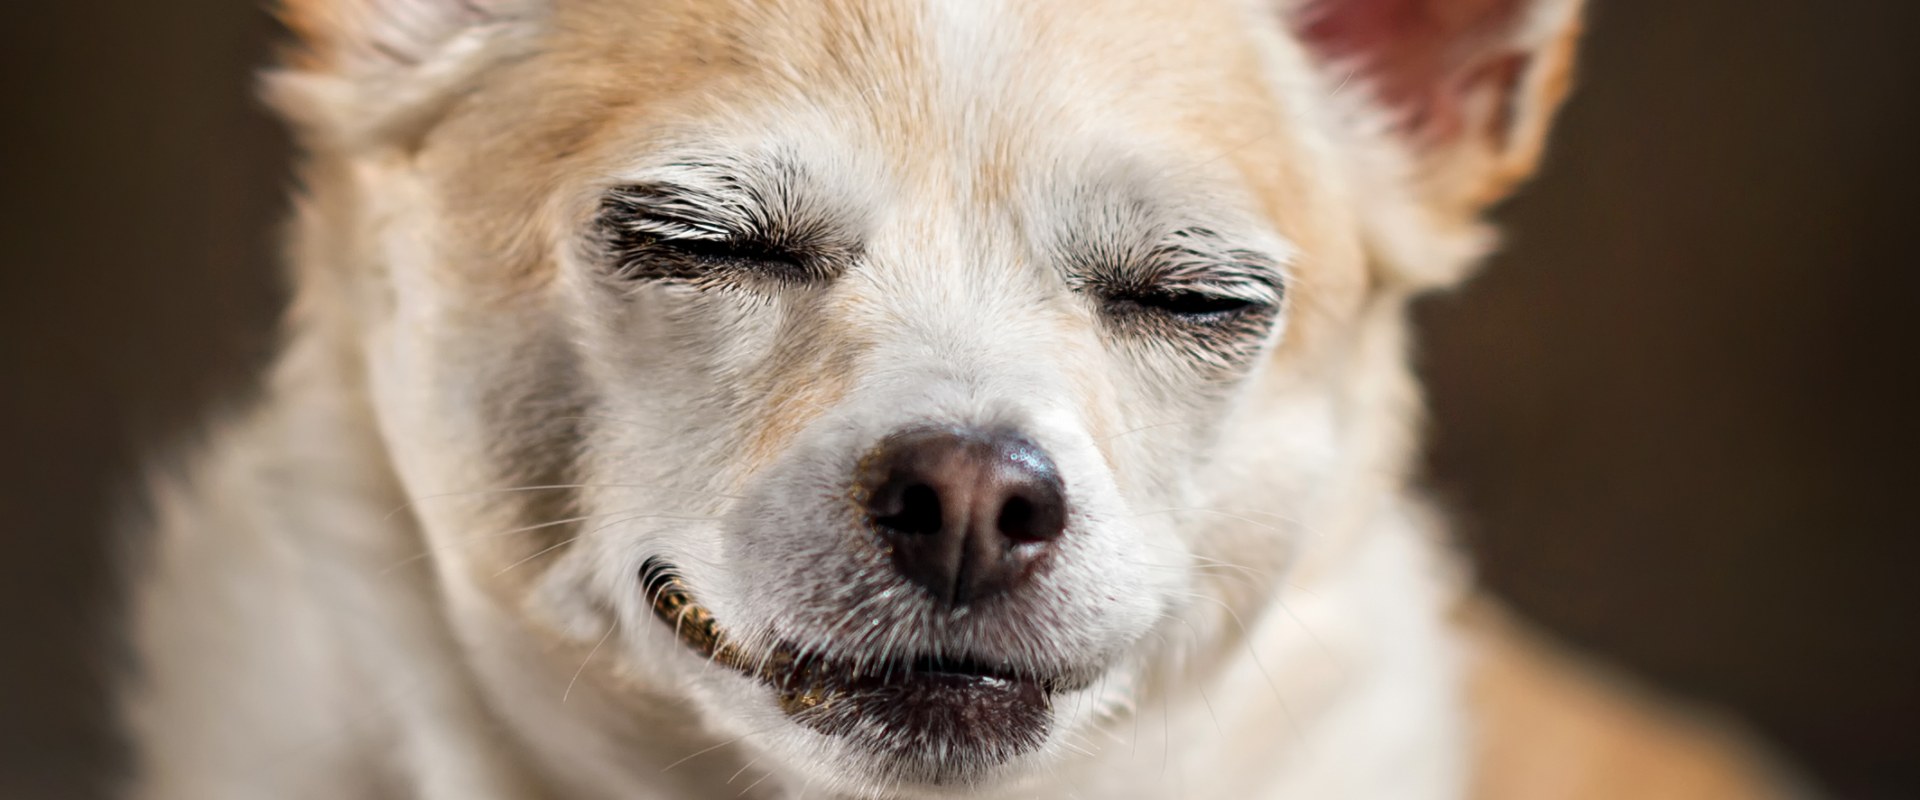 What Are the Effects of THC on Dogs?